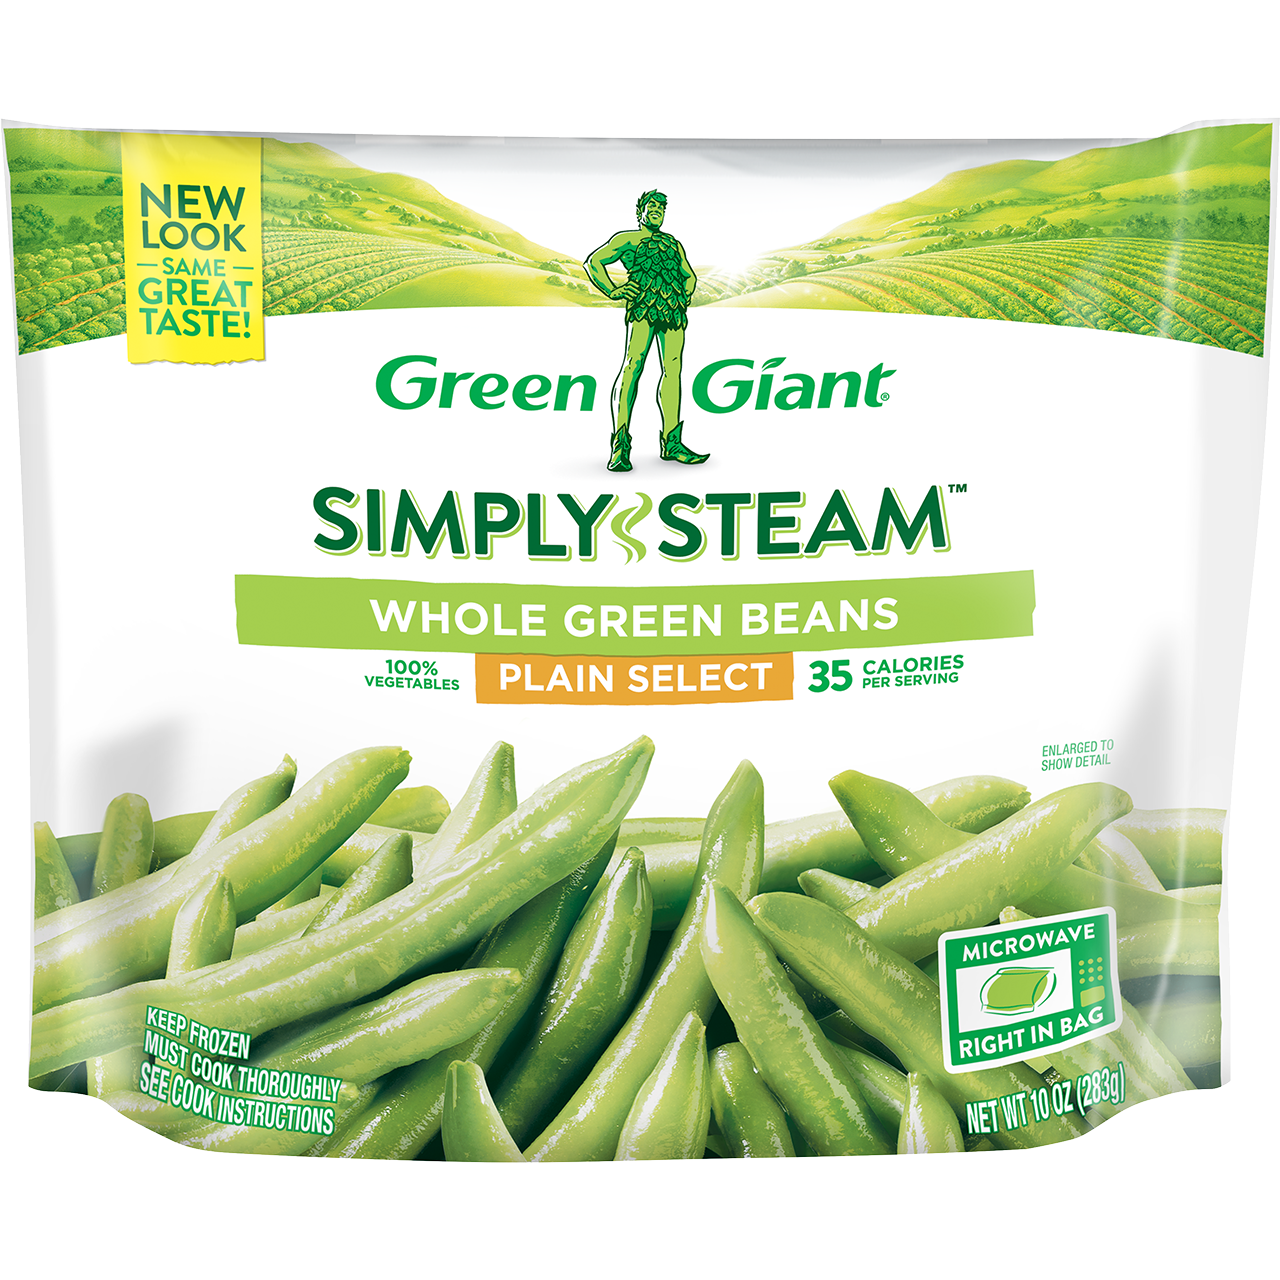 https://greengiant.com/wp-content/uploads/2023/02/Selects-Whole-Green-Beans-3D-Image.png